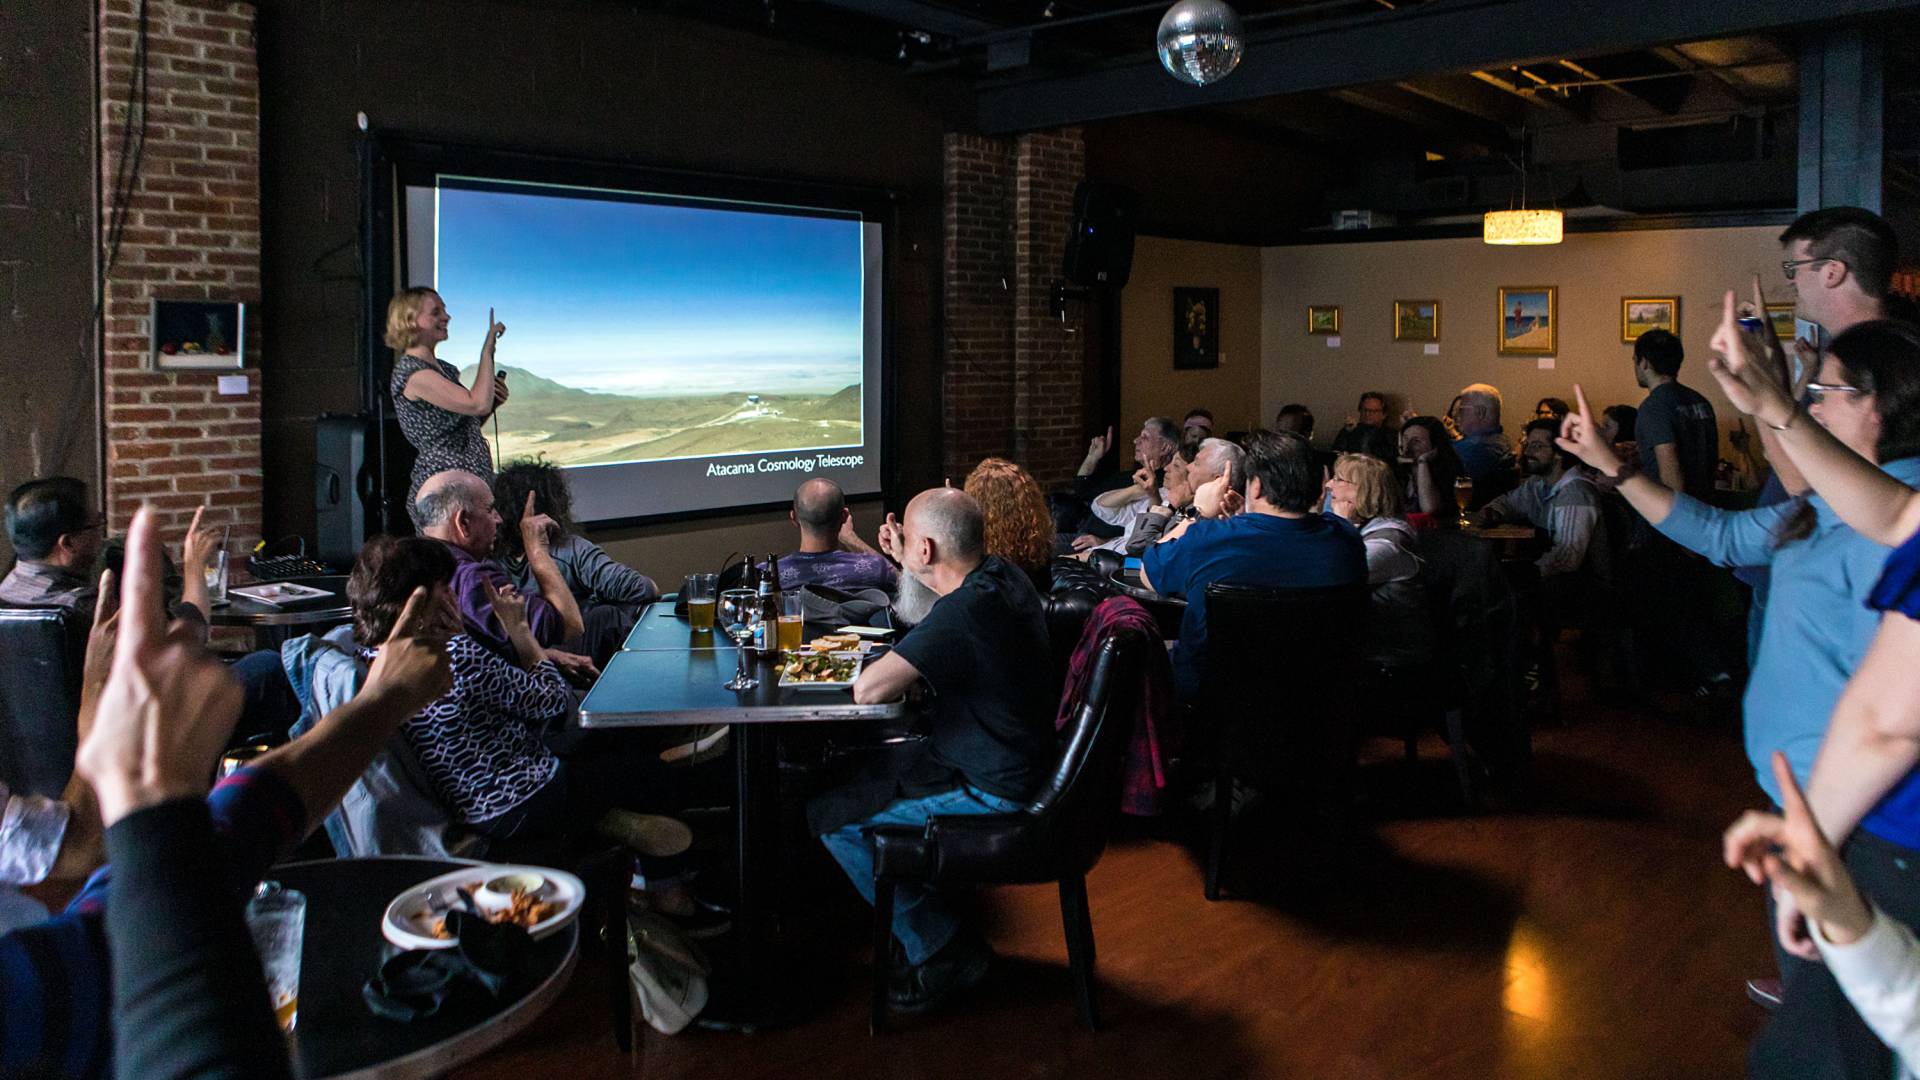 Astronomy on Tap brings astrophysicists and the community together at a Trenton pic photo